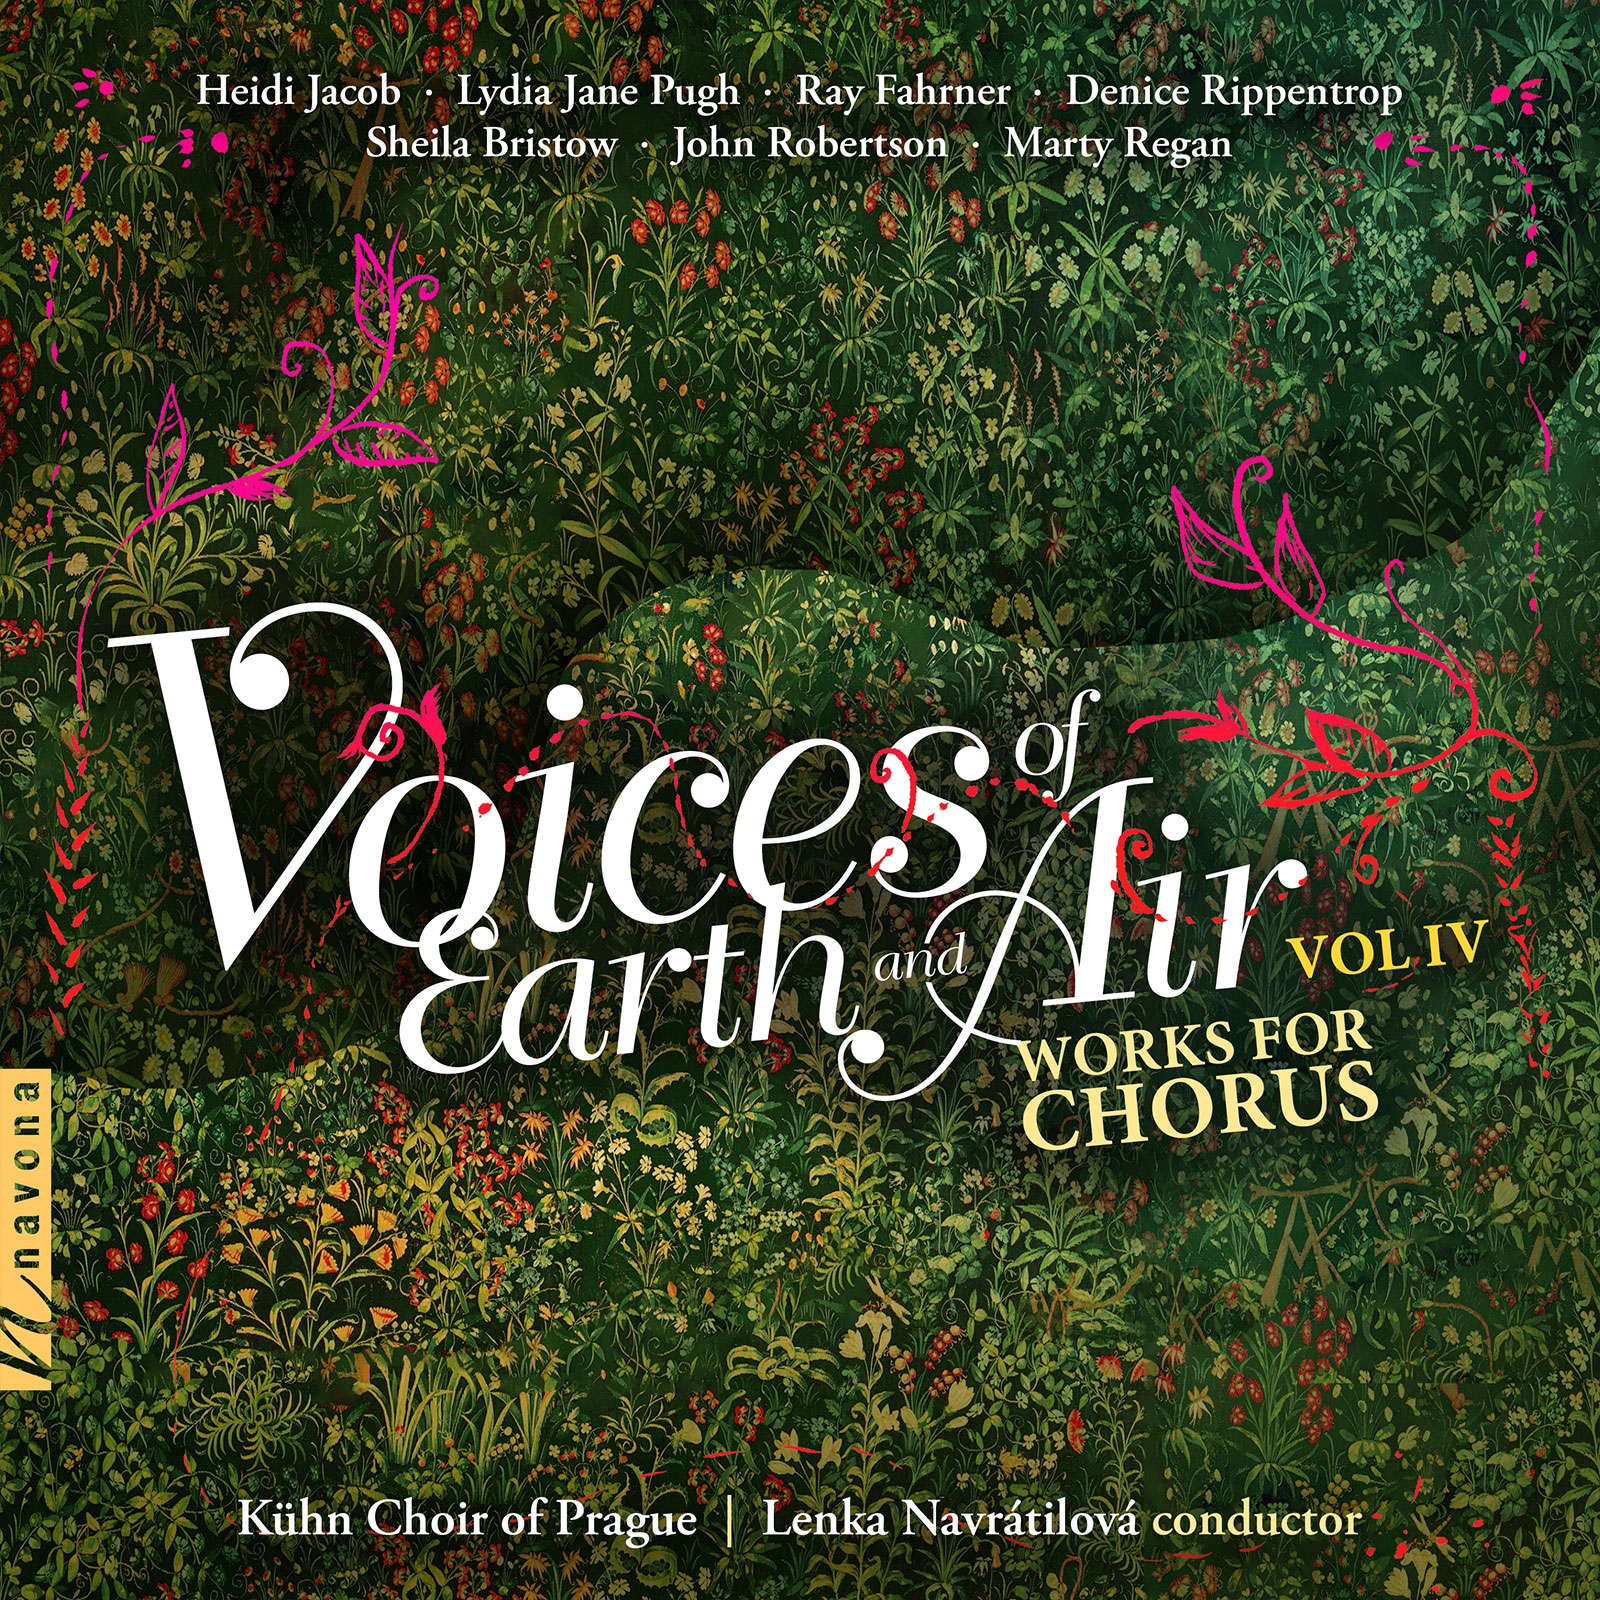 Voices of Earth and Air Vol IV